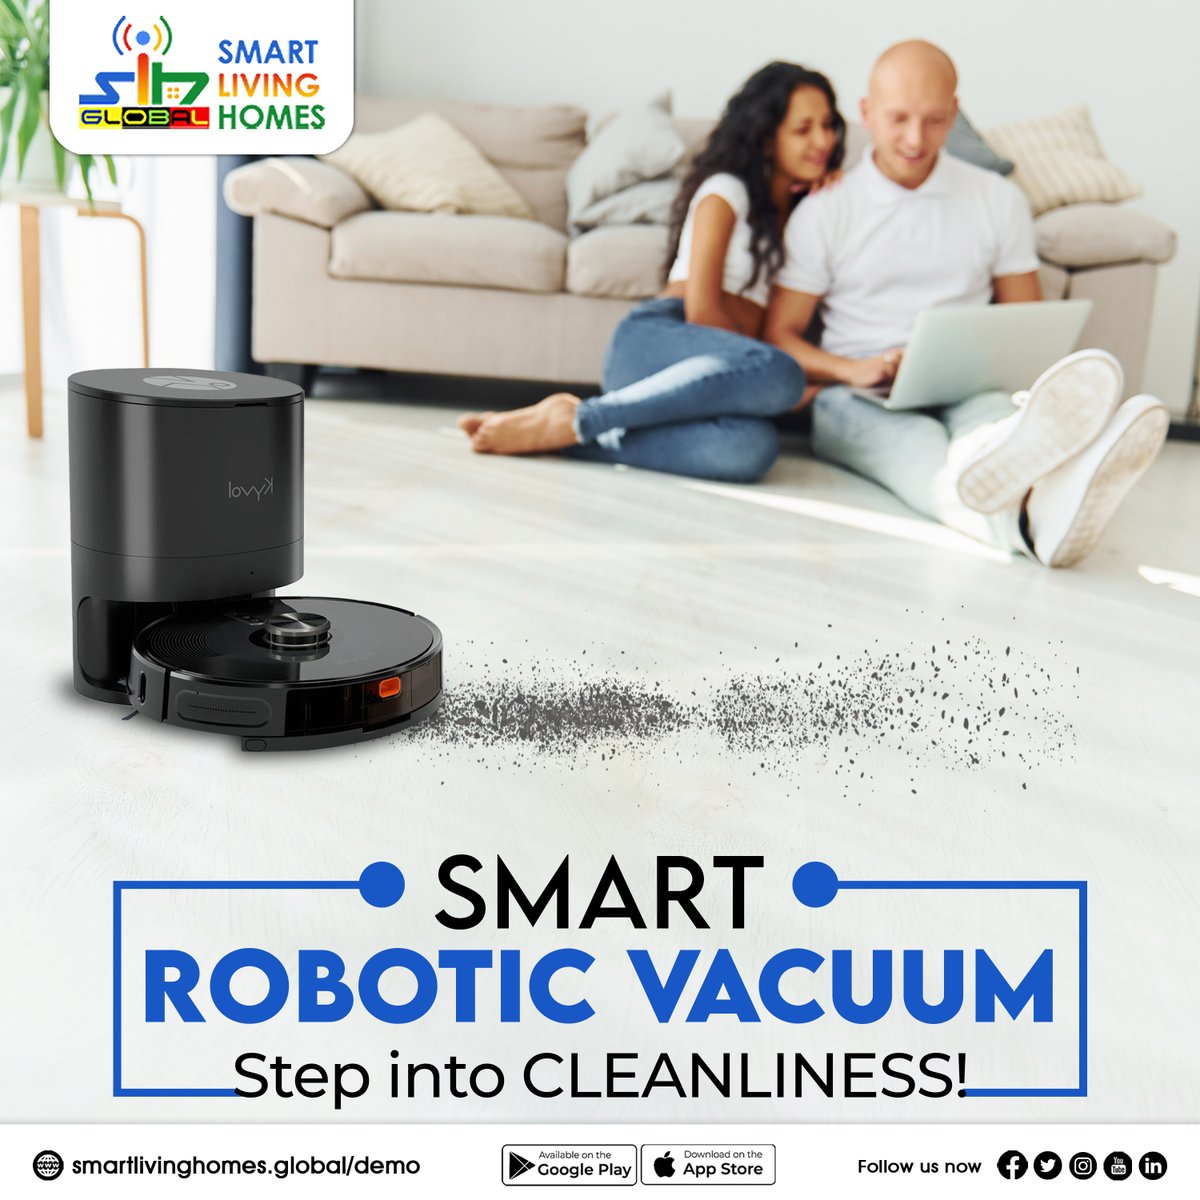 Quality assurance guaranteed! Unlock the peace of mind you deserve with our SAA, CE, FCC-certified Smart living homes global's smart garage door opener. #safety #garagedoor #smartgargedoor #smarthomes #innovativegadgets

#smartroboticvacuum
#robotictechnology #handsfreecleaning